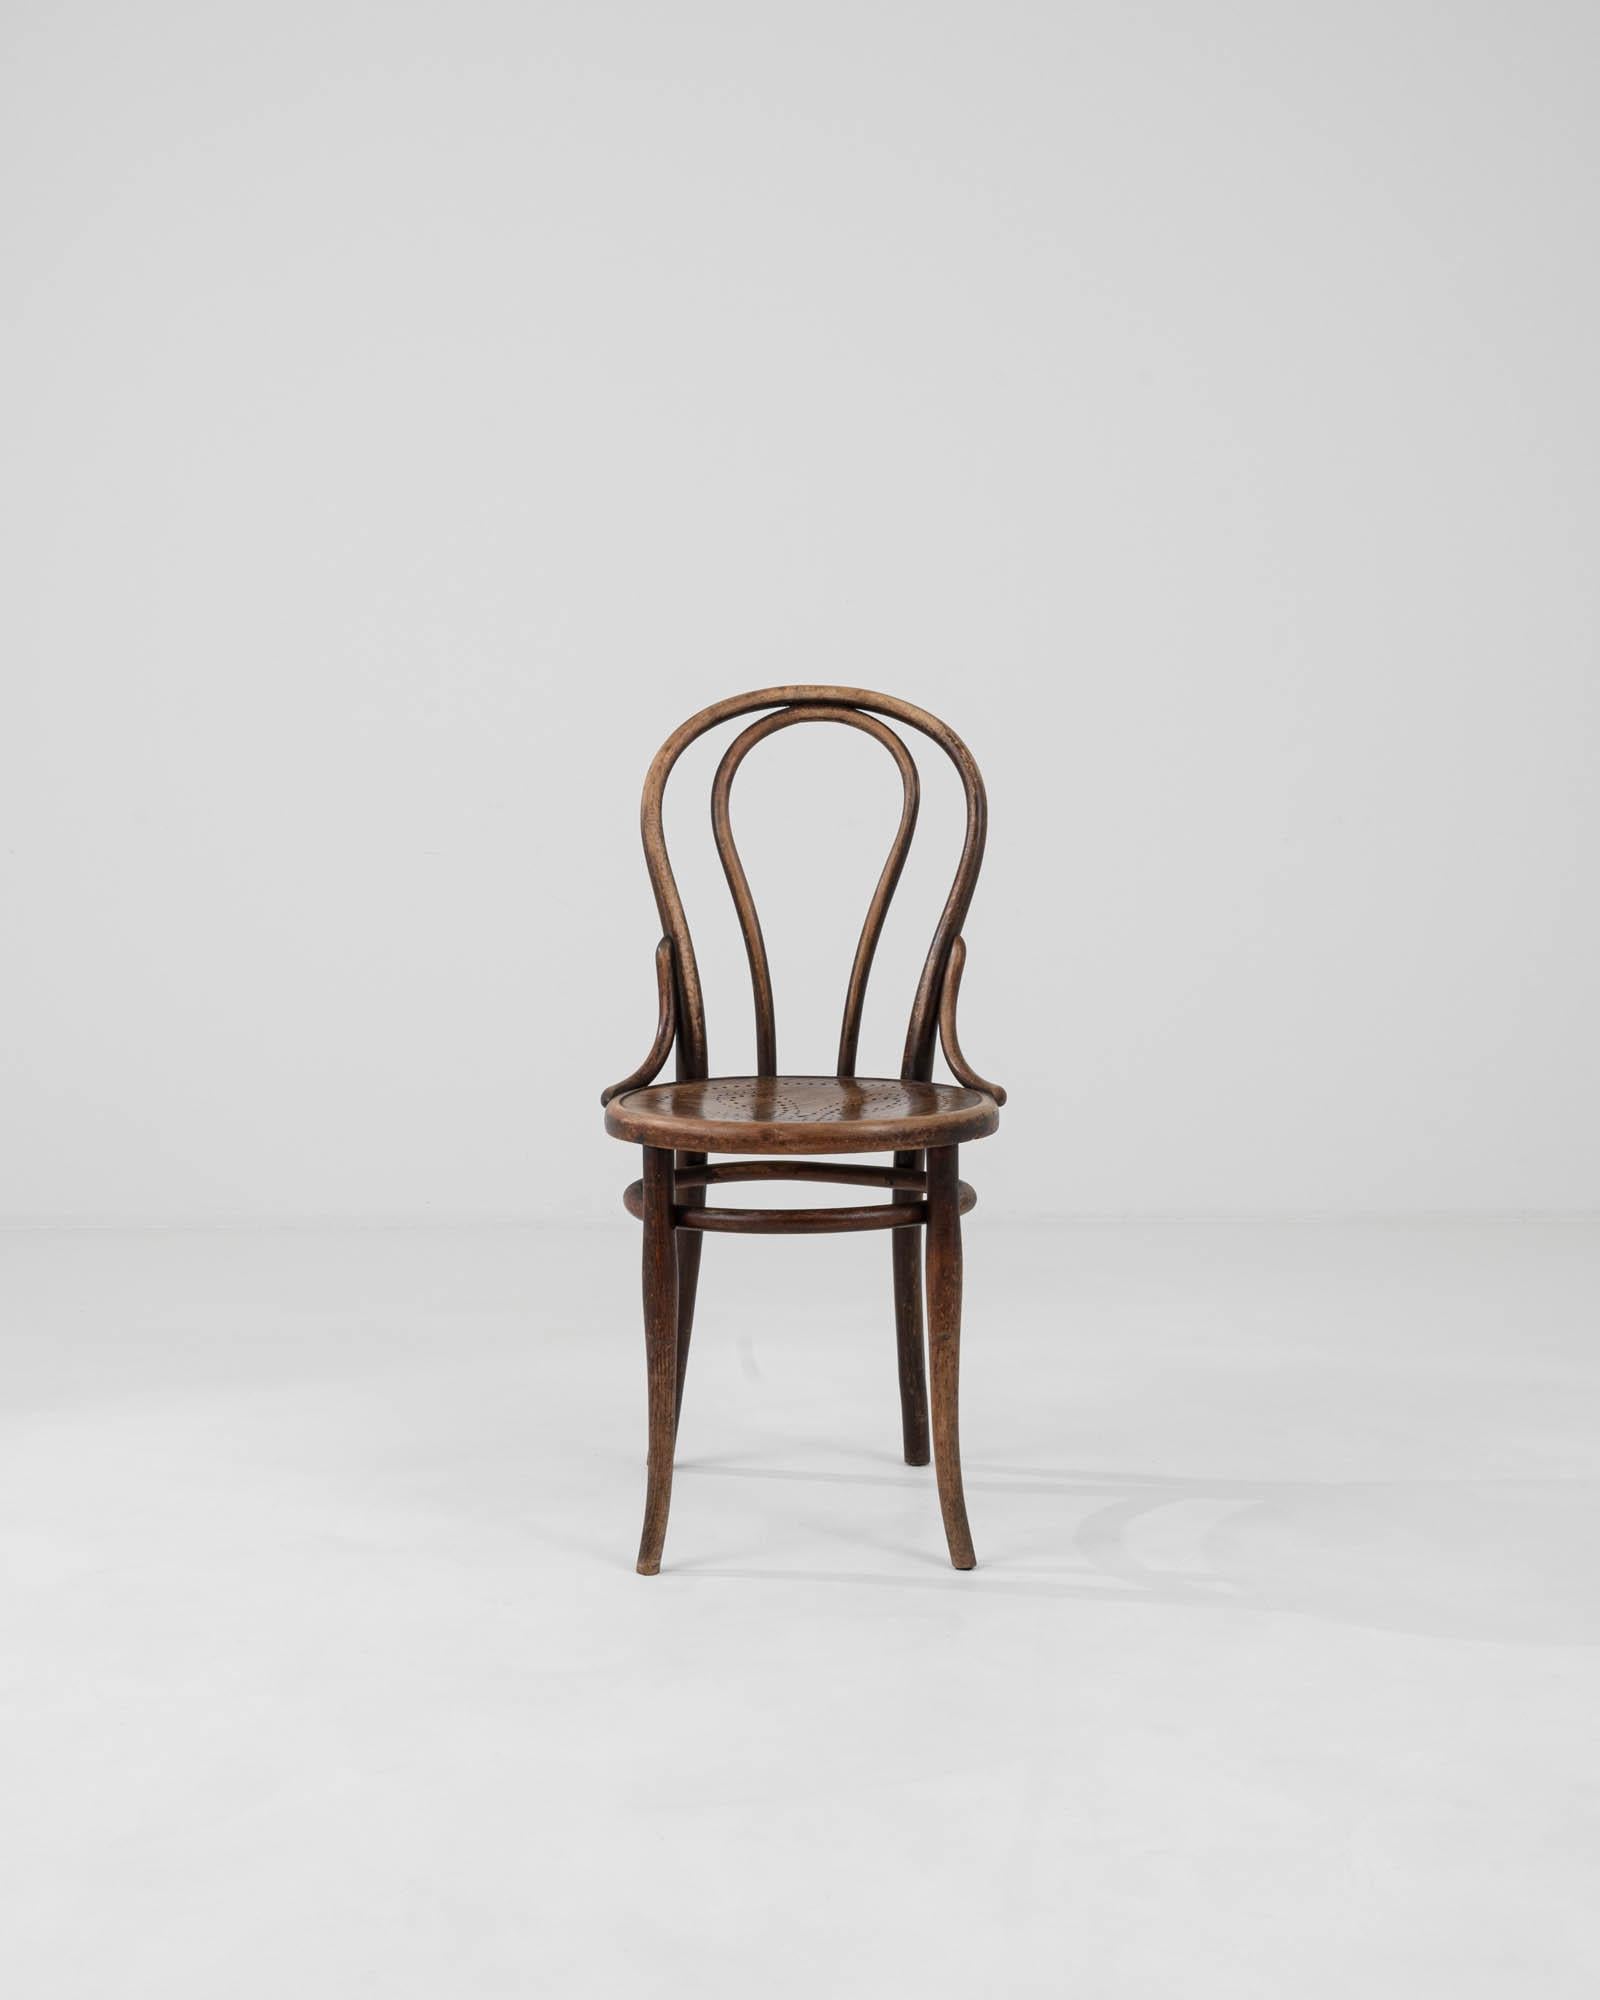 Introducing the timeless elegance of the early 20th Century with this exquisite Austrian Curved Chair by Thonet, a masterpiece of craftsmanship and design. Hailing from an era where detail and form spoke volumes, this chair is not only a piece of